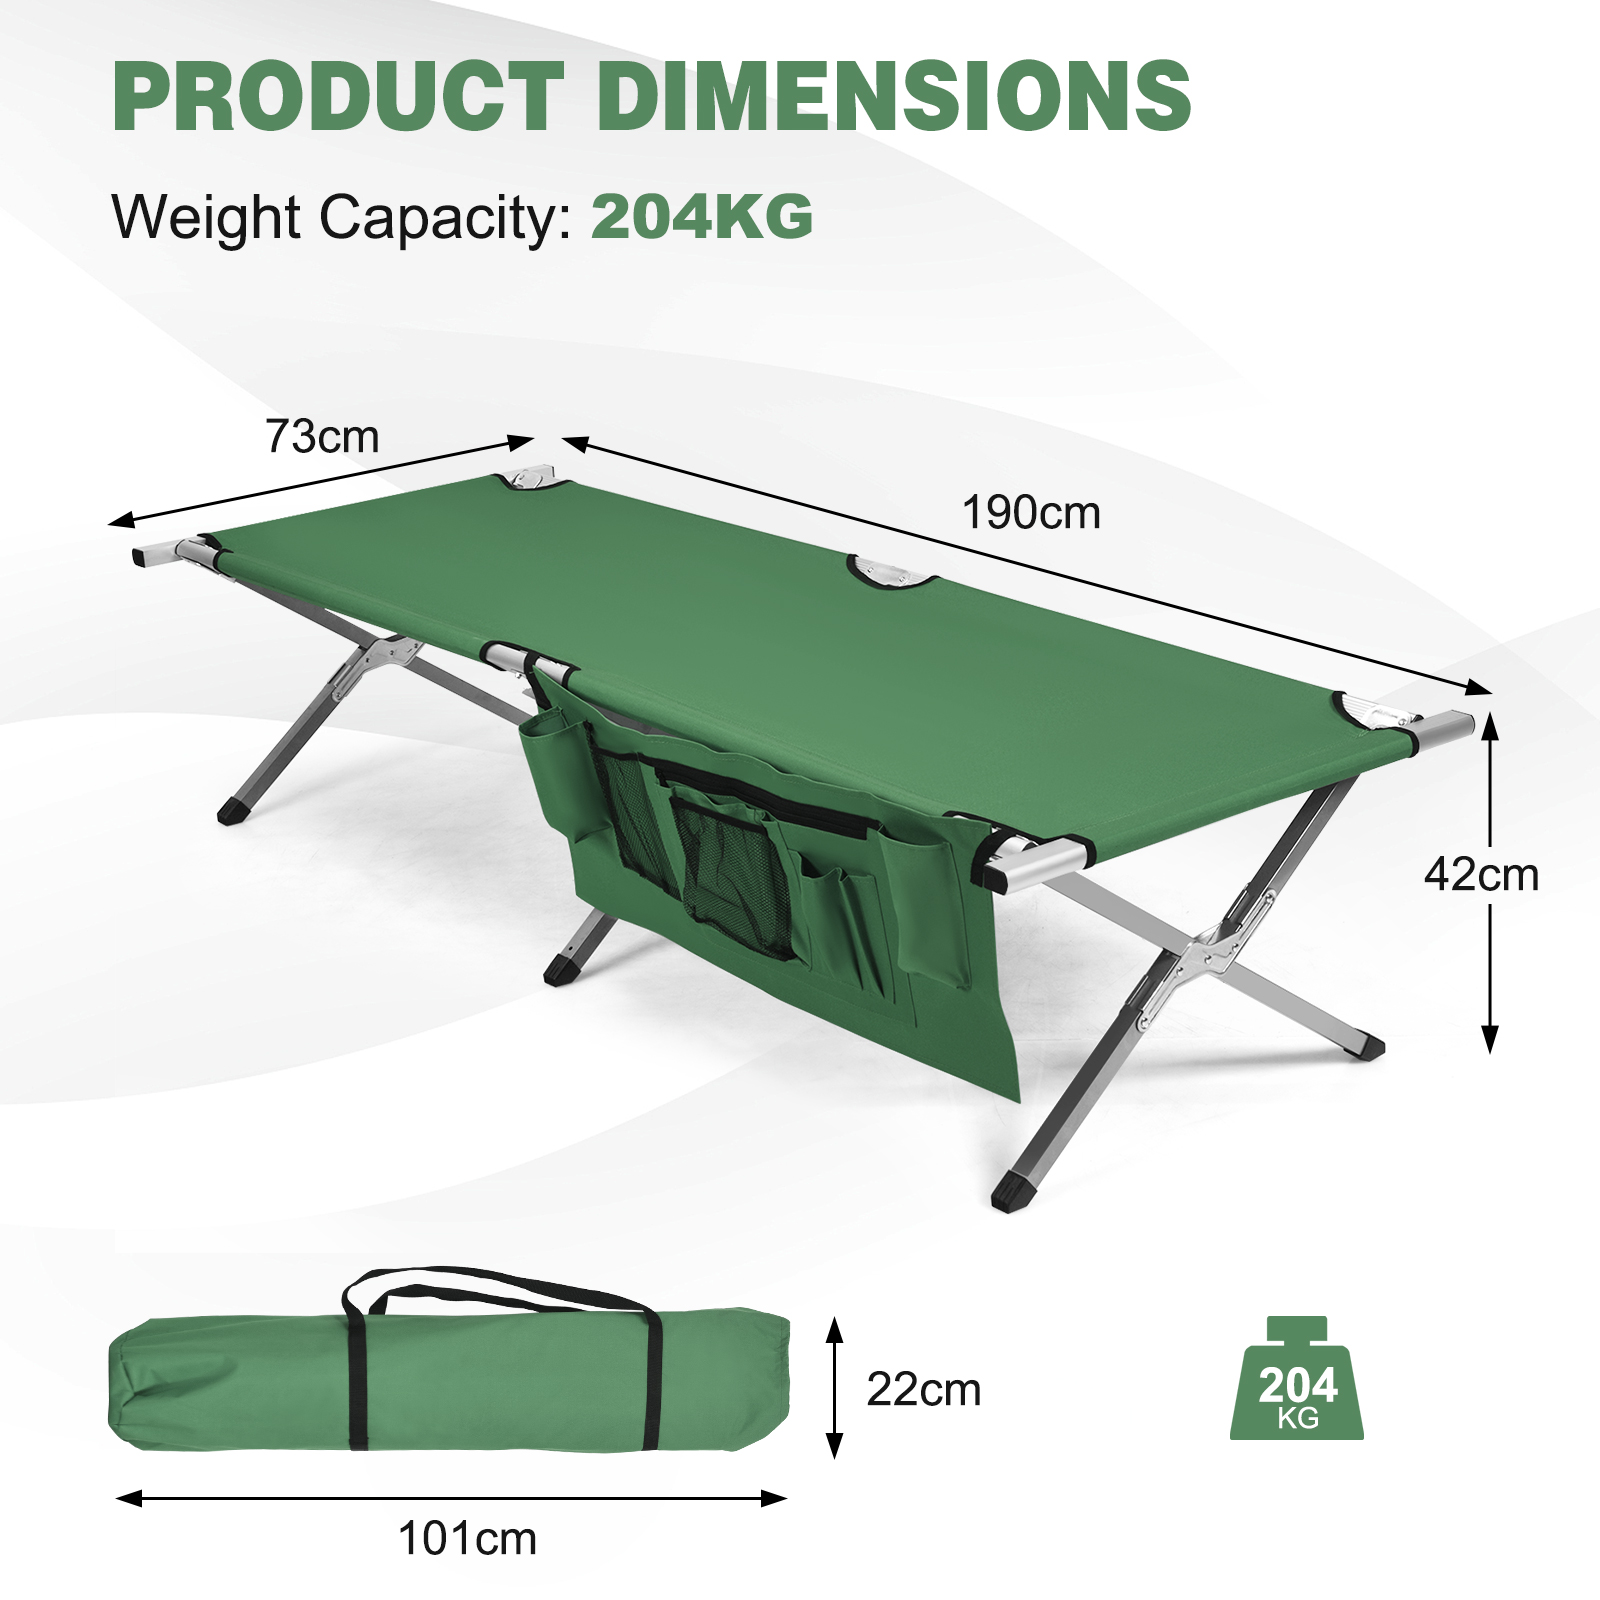 Folding_Camping_Bed_Outdoor_Sleeping_Cot_with_Carry_Bag_for_Beach_Green_size-4.jpg